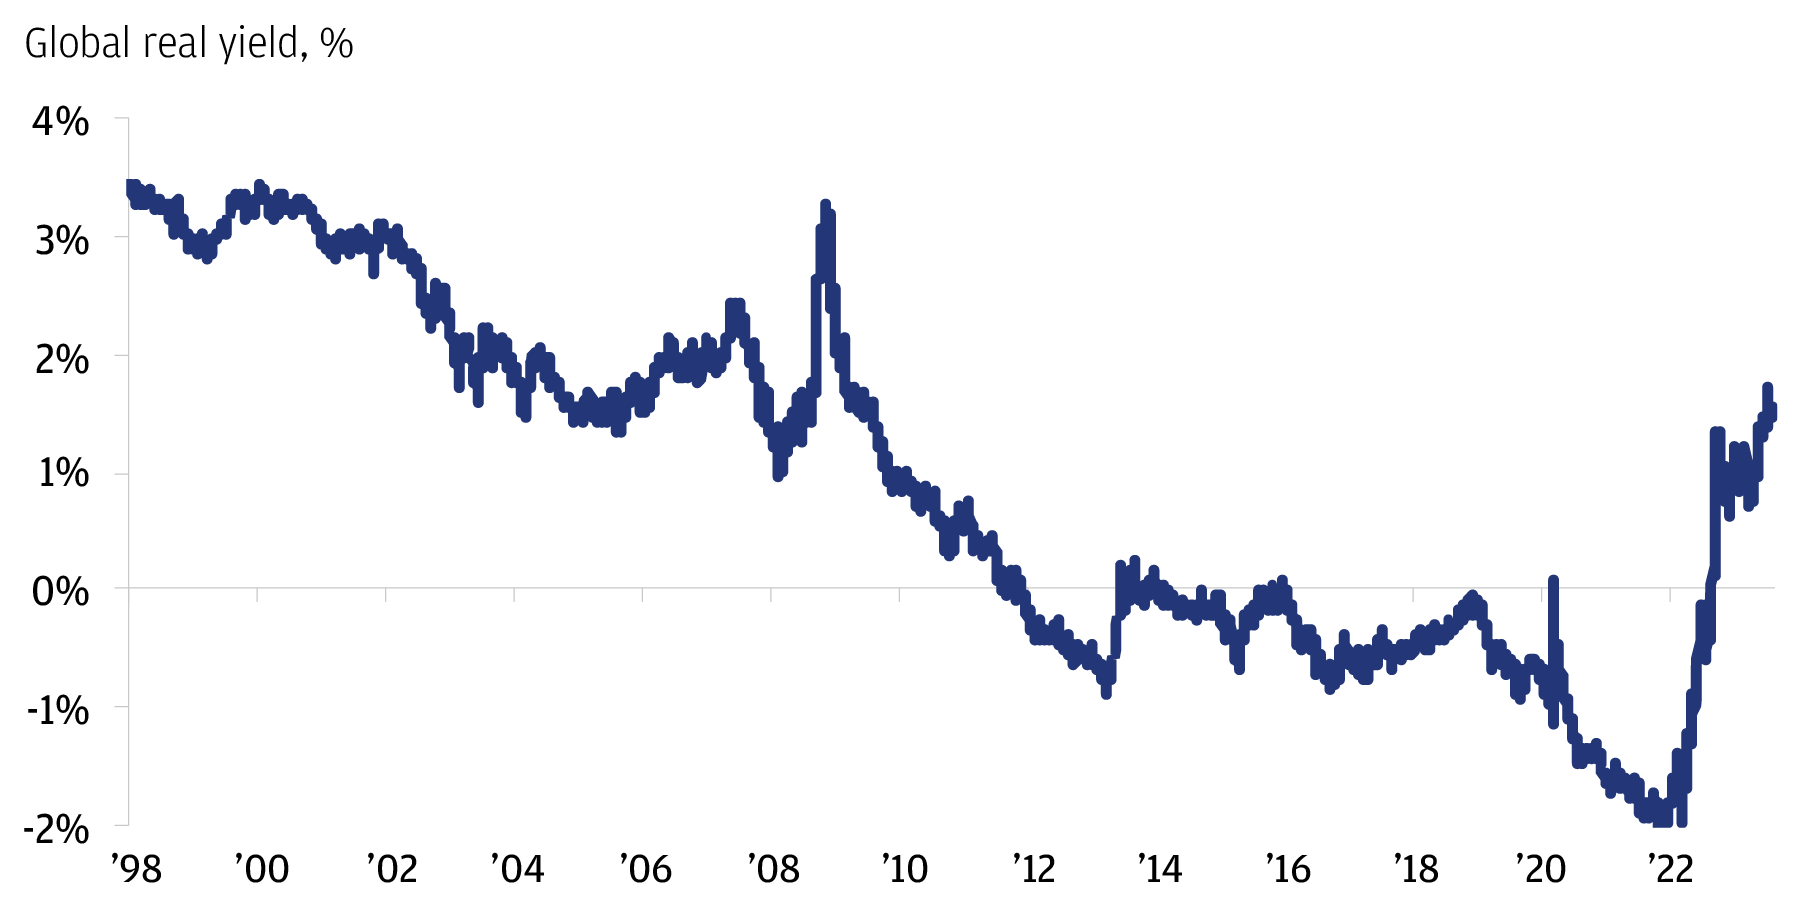 This graph shows the global real yield as a percentage during a time period of 14 years from 1998 to 2022.